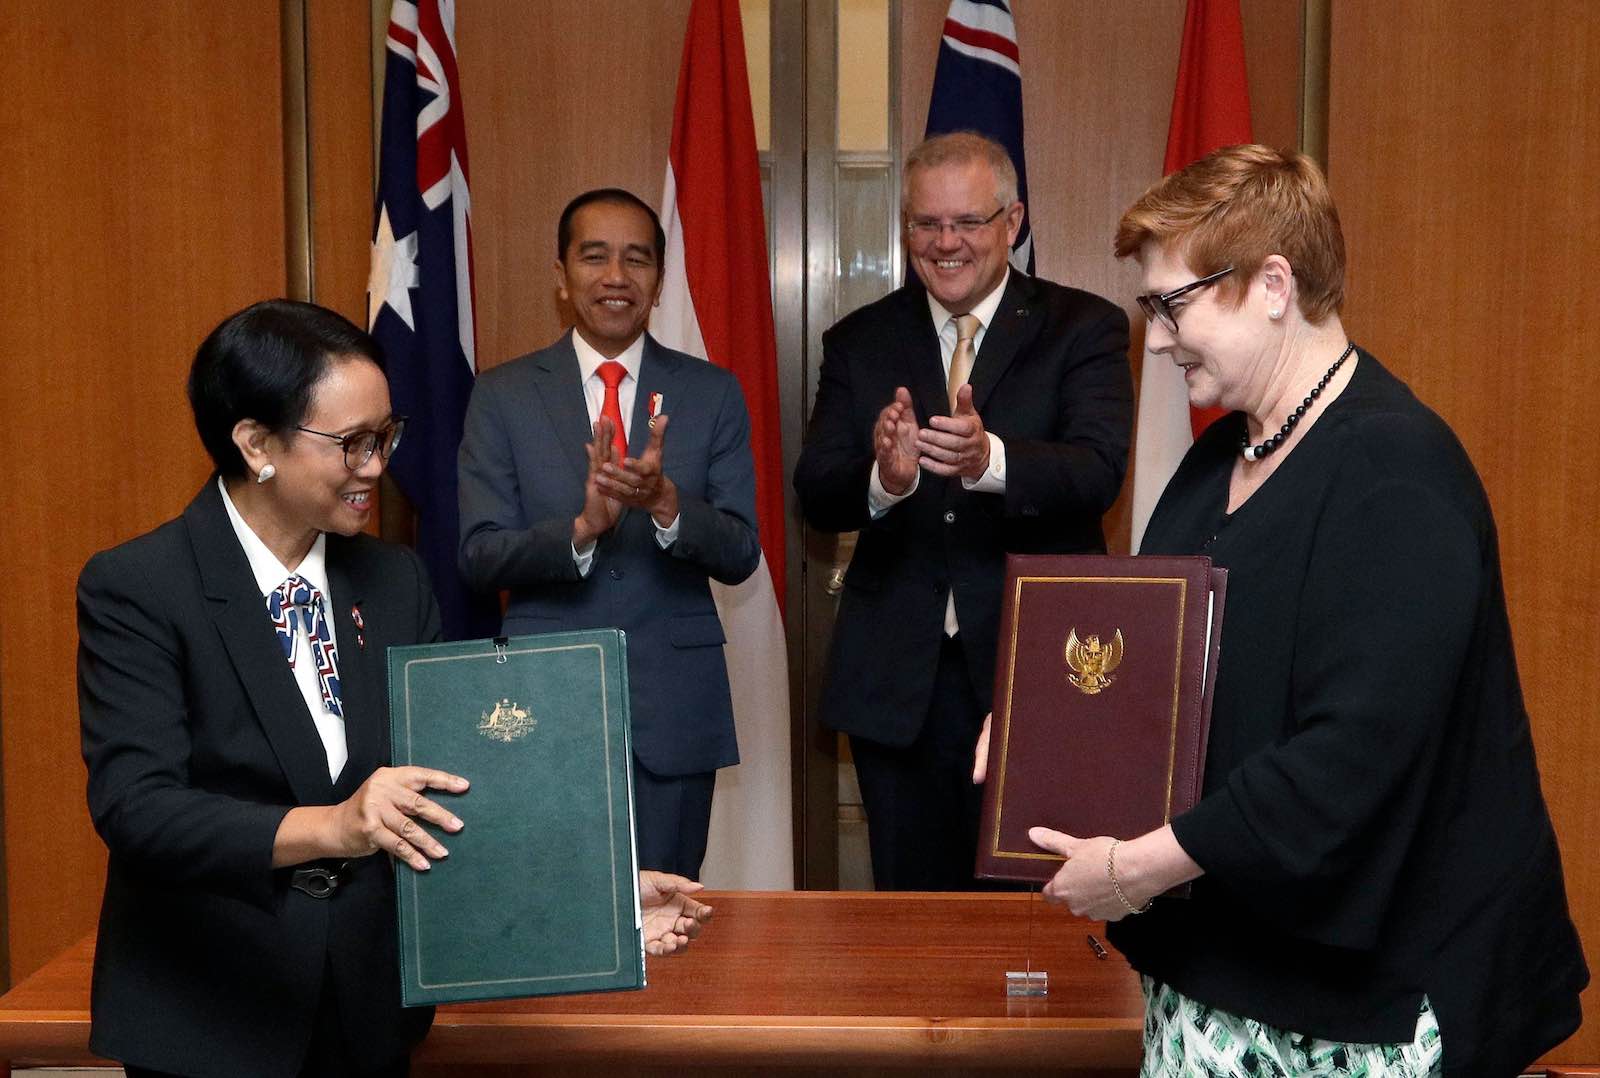 Indonesia’s President Joko Widodo and Australia’s Prime Minister Scott Morrison watch as foreign ministers Retno Marsudi and Marise Payne sign agreements in Canberra on 10 February (Photo: Rick Rycroft/AFP/Getty Images)